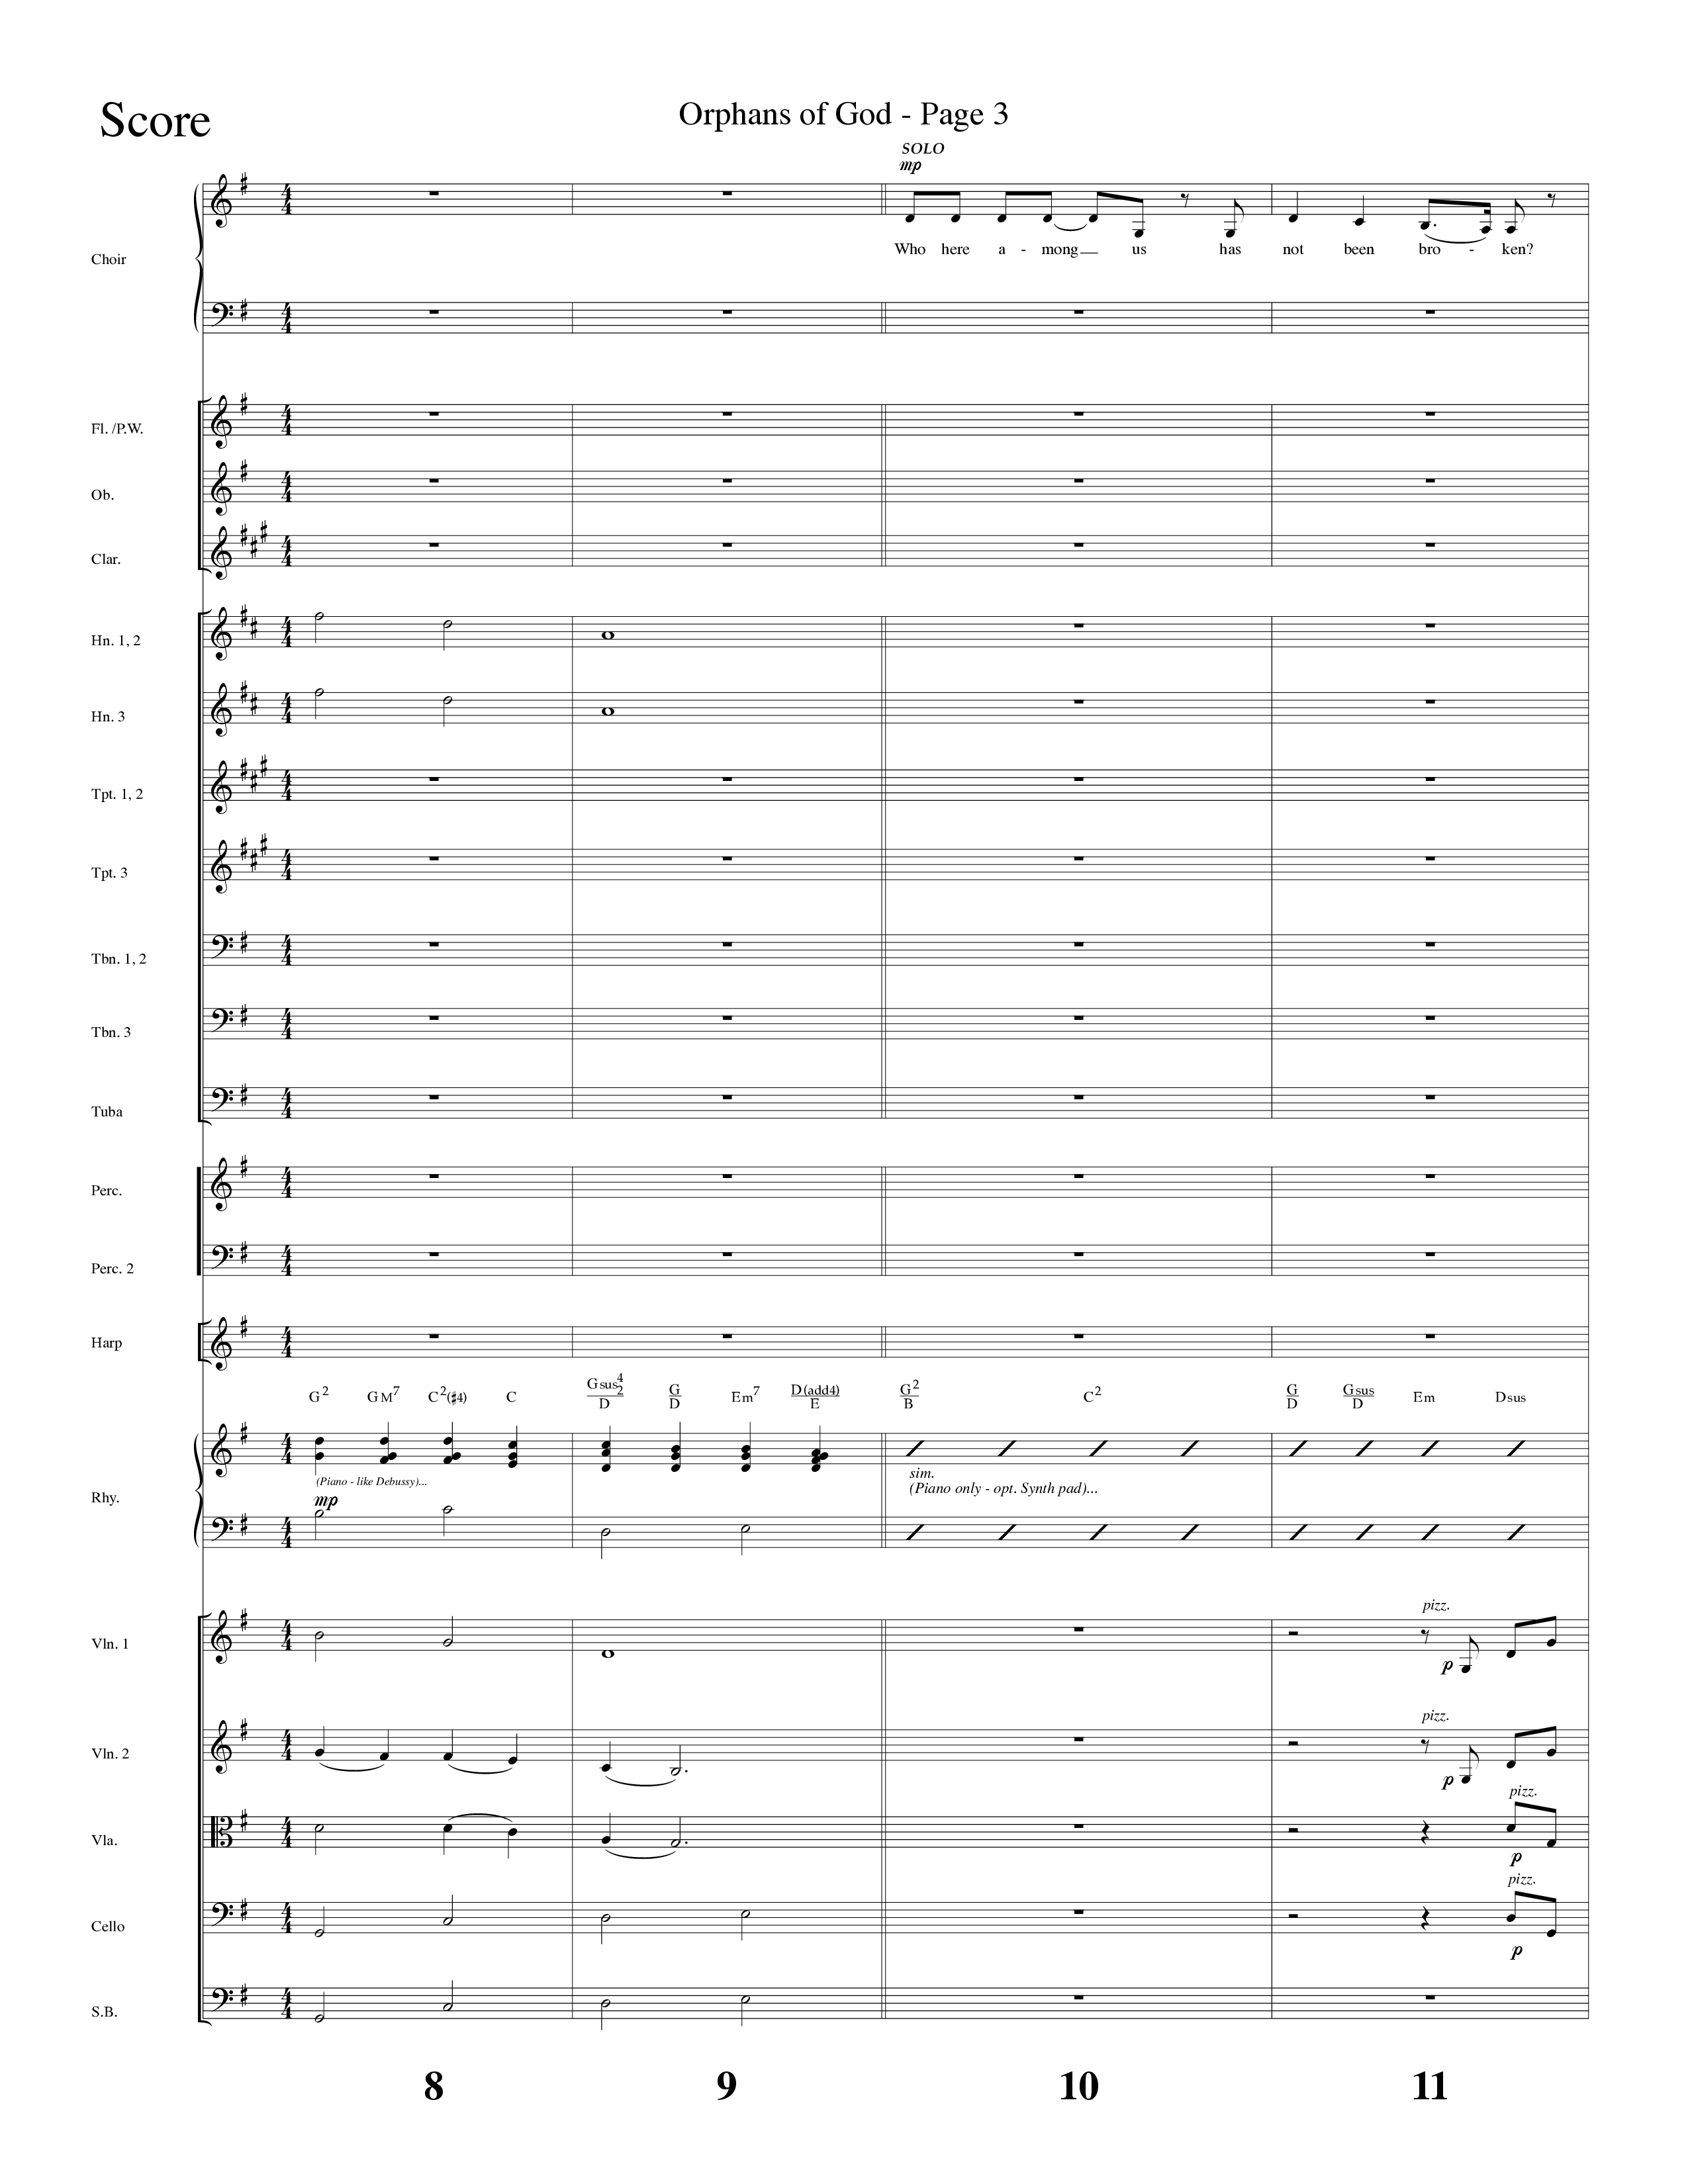 Orphans Of God (Choral Anthem SATB) Conductor's Score (Lifeway Choral / Arr. Dave Williamson)